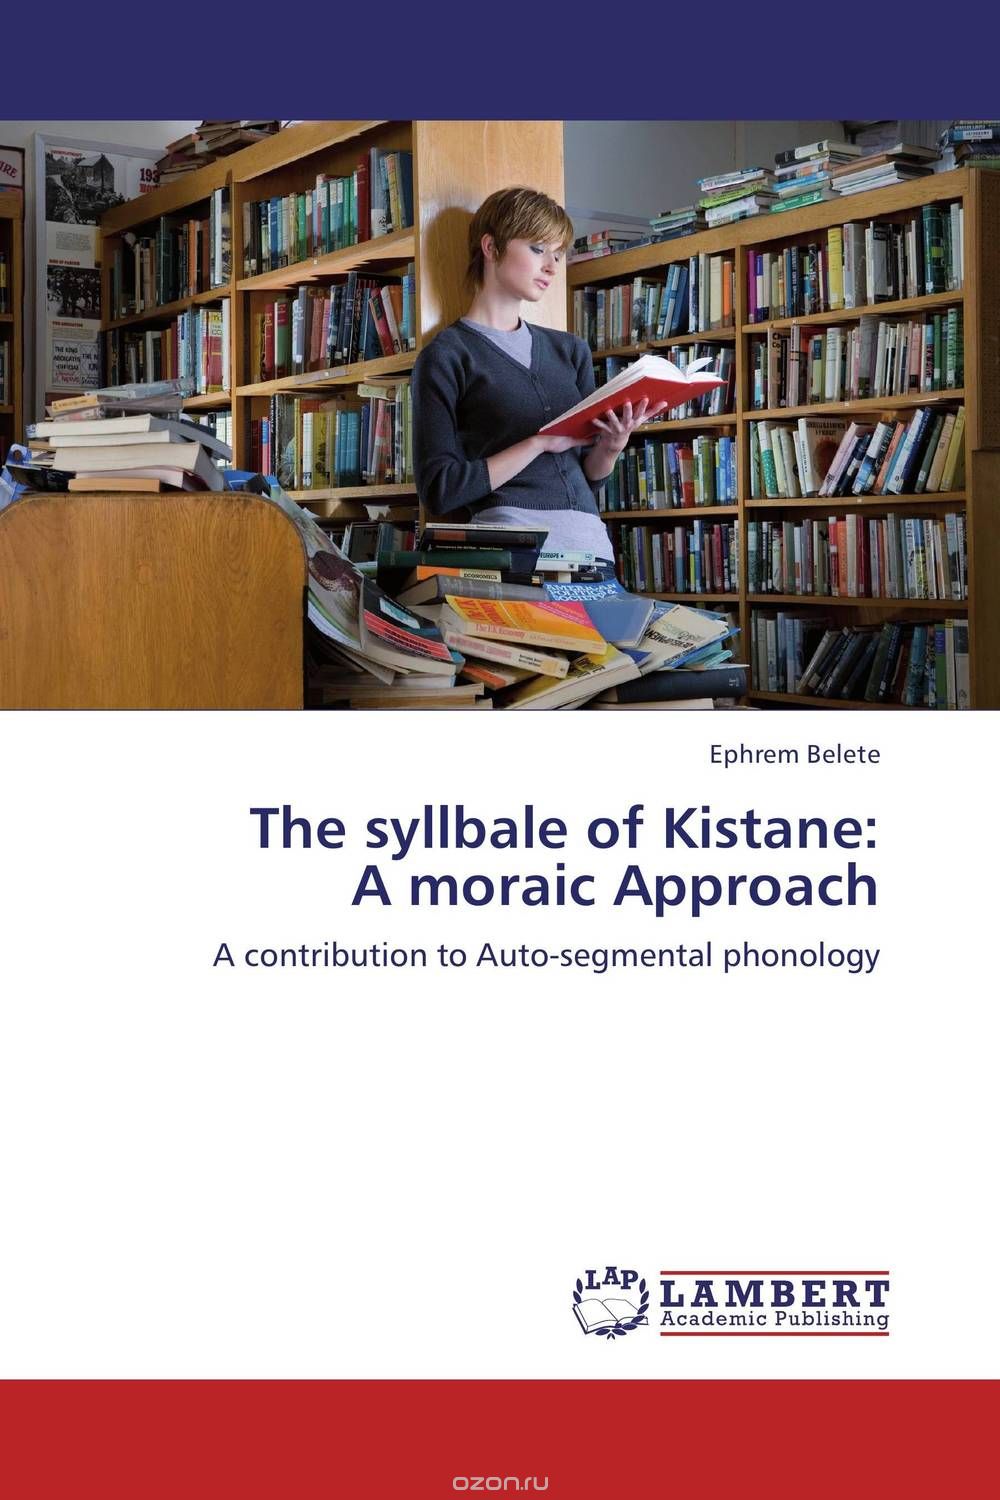 The syllbale of Kistane:  A moraic Approach